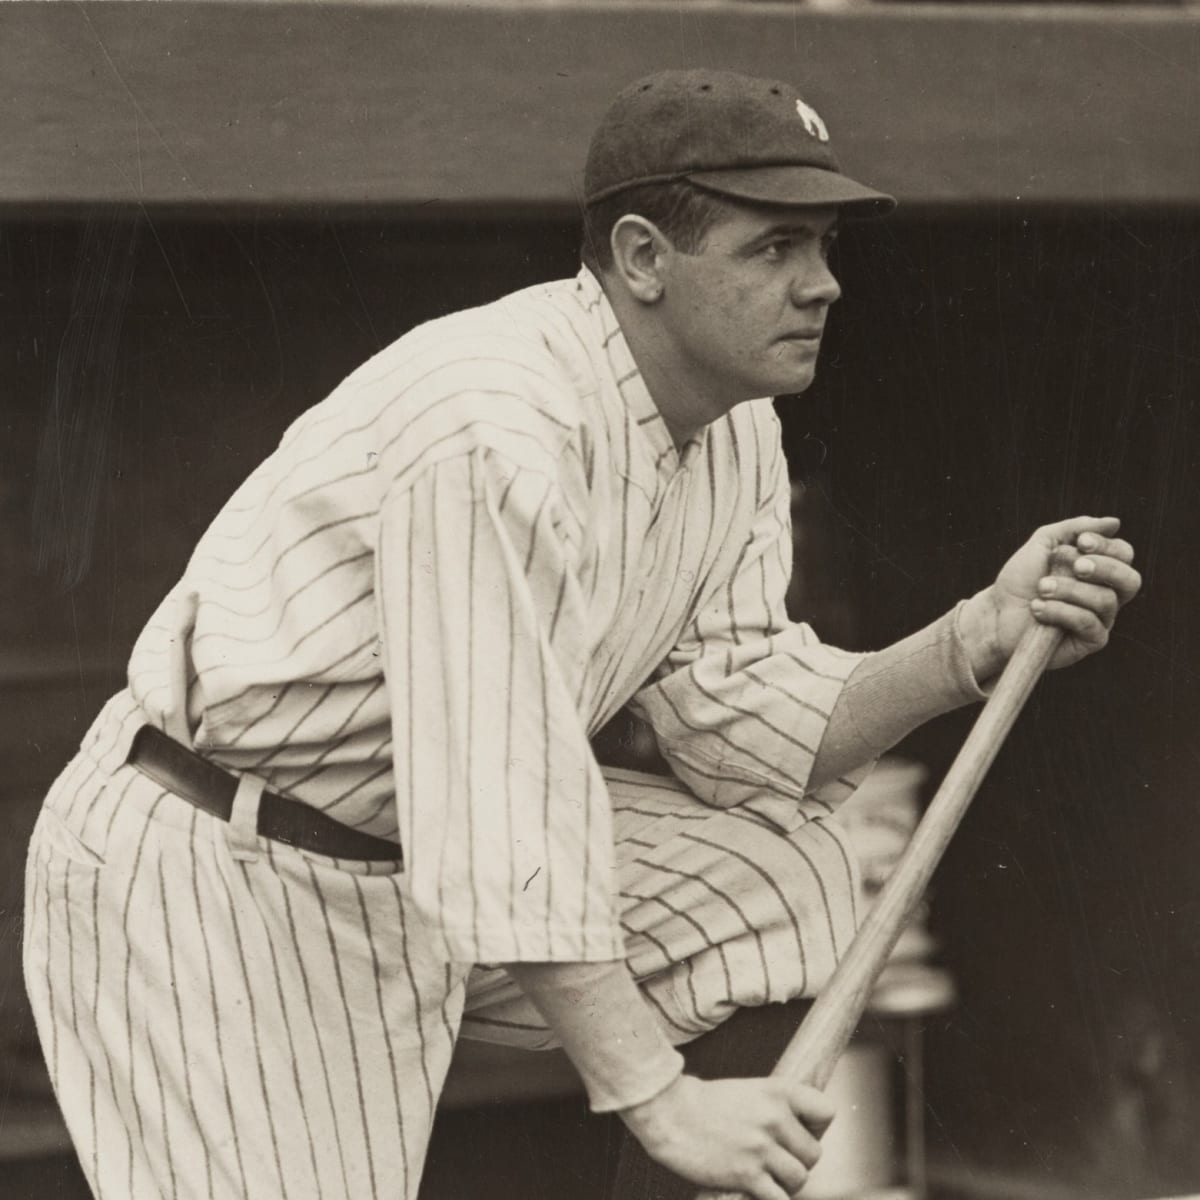 This Day in Braves History: Babe Ruth retires from baseball